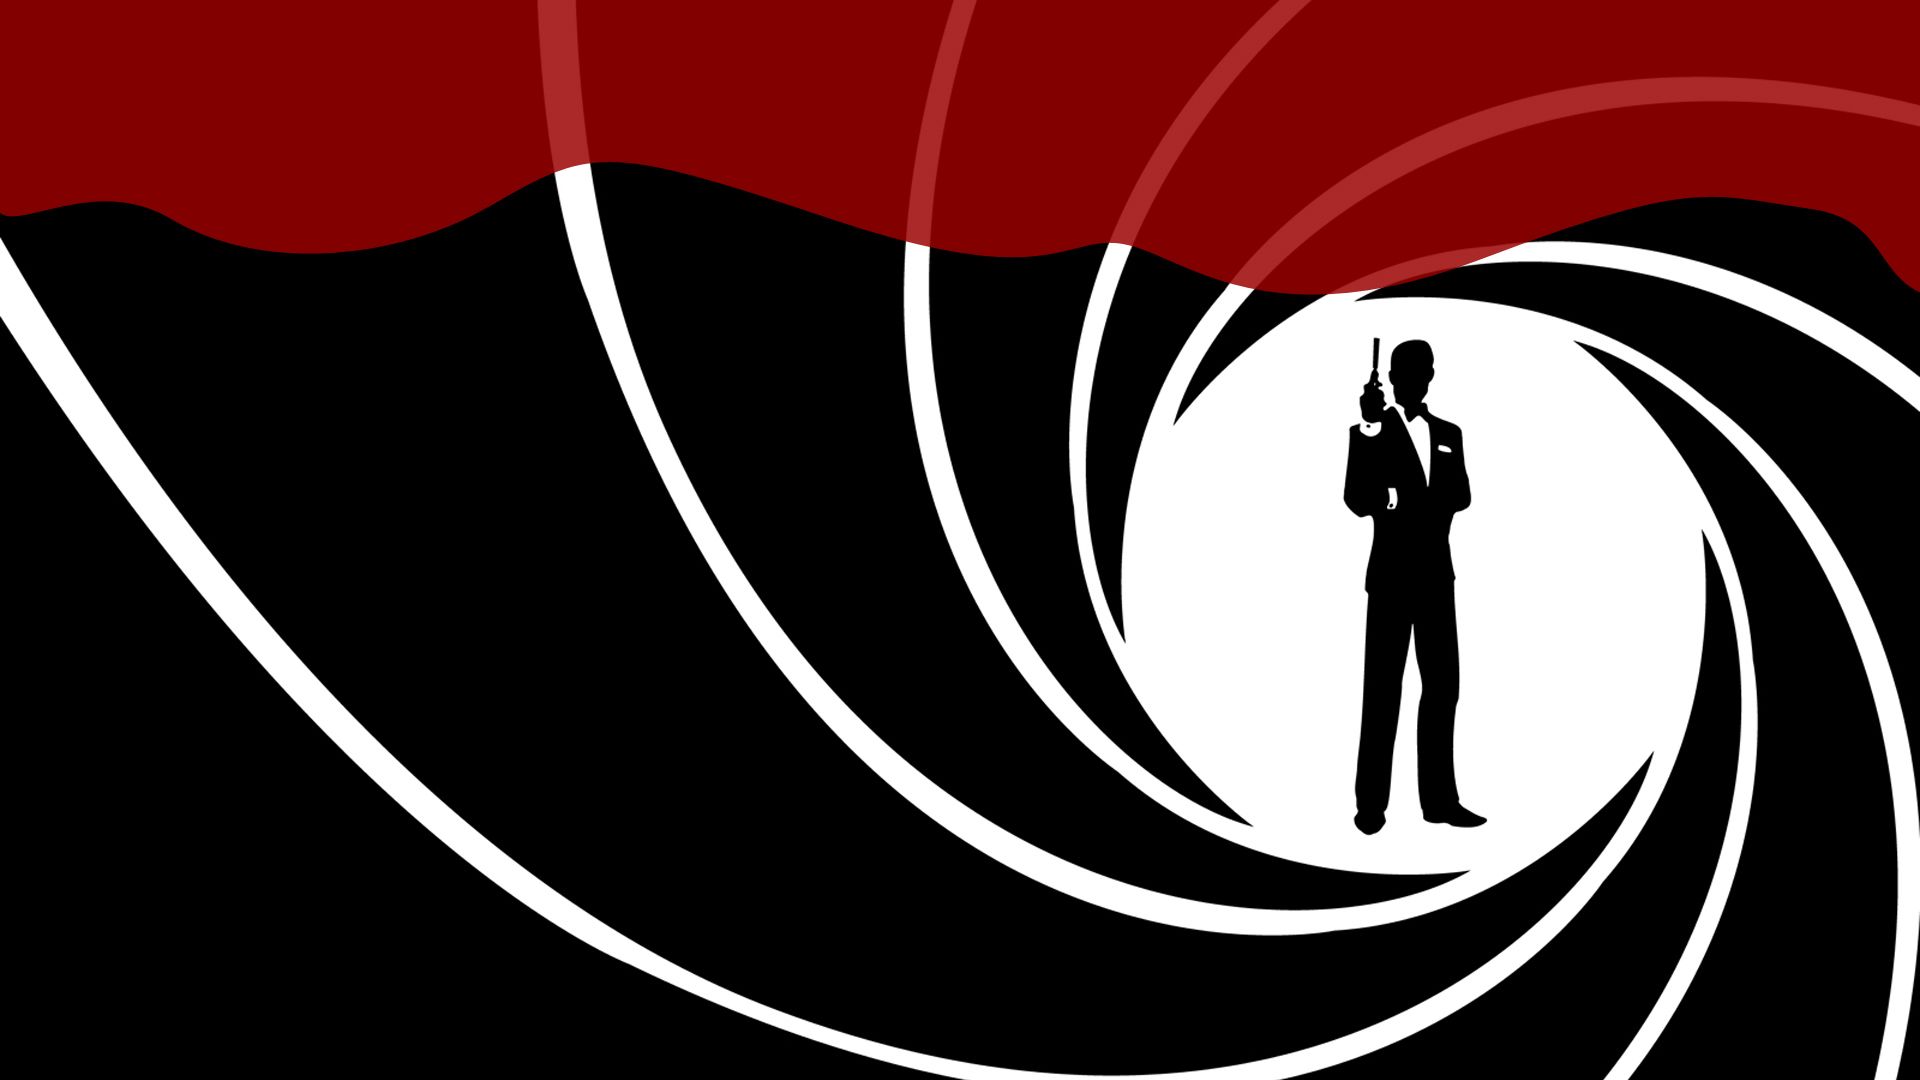 Who Will Be the Next James Bond? The Top 10 Contenders